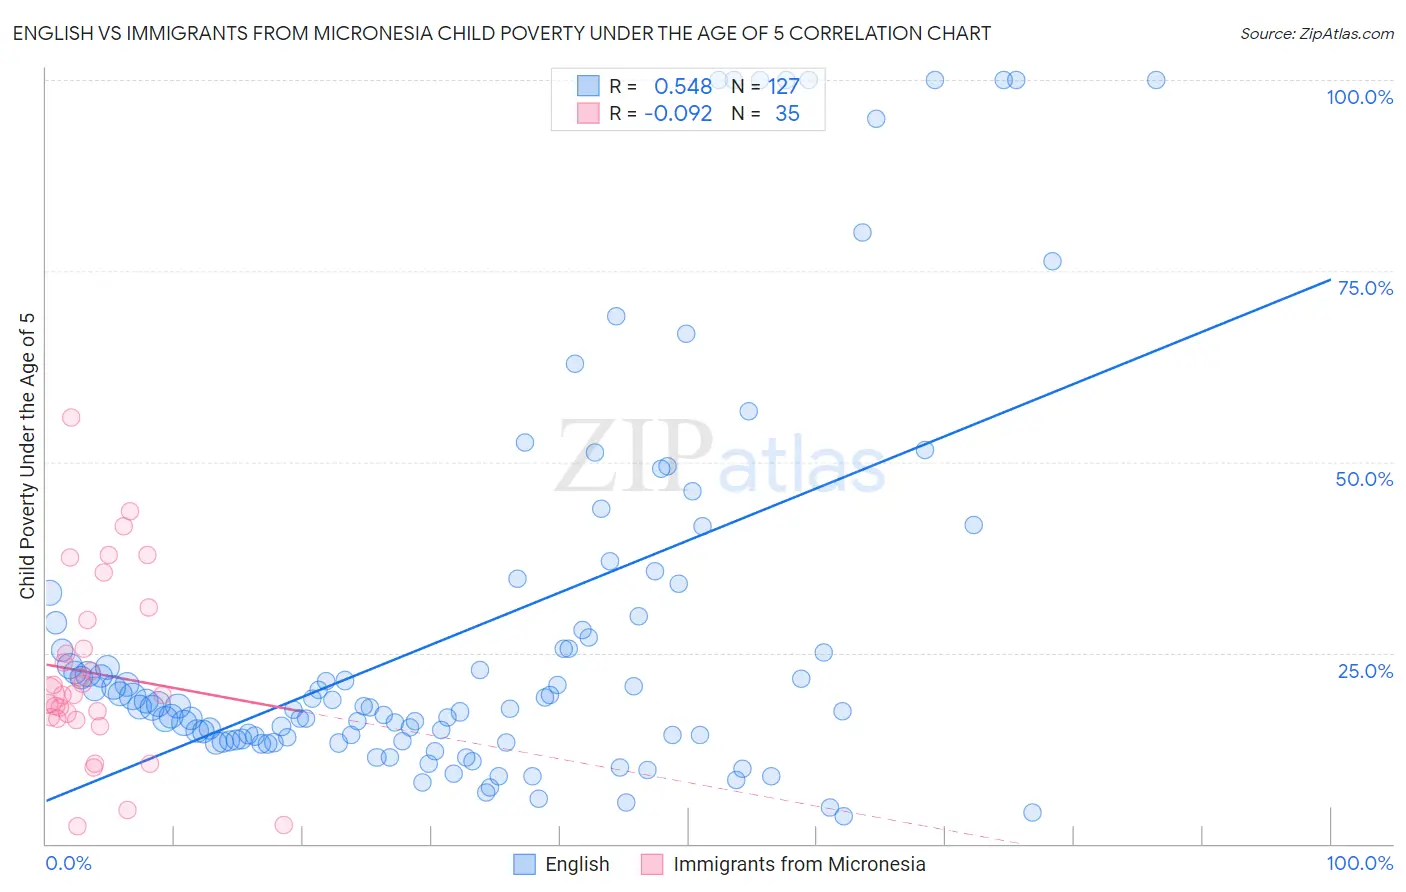 English vs Immigrants from Micronesia Child Poverty Under the Age of 5